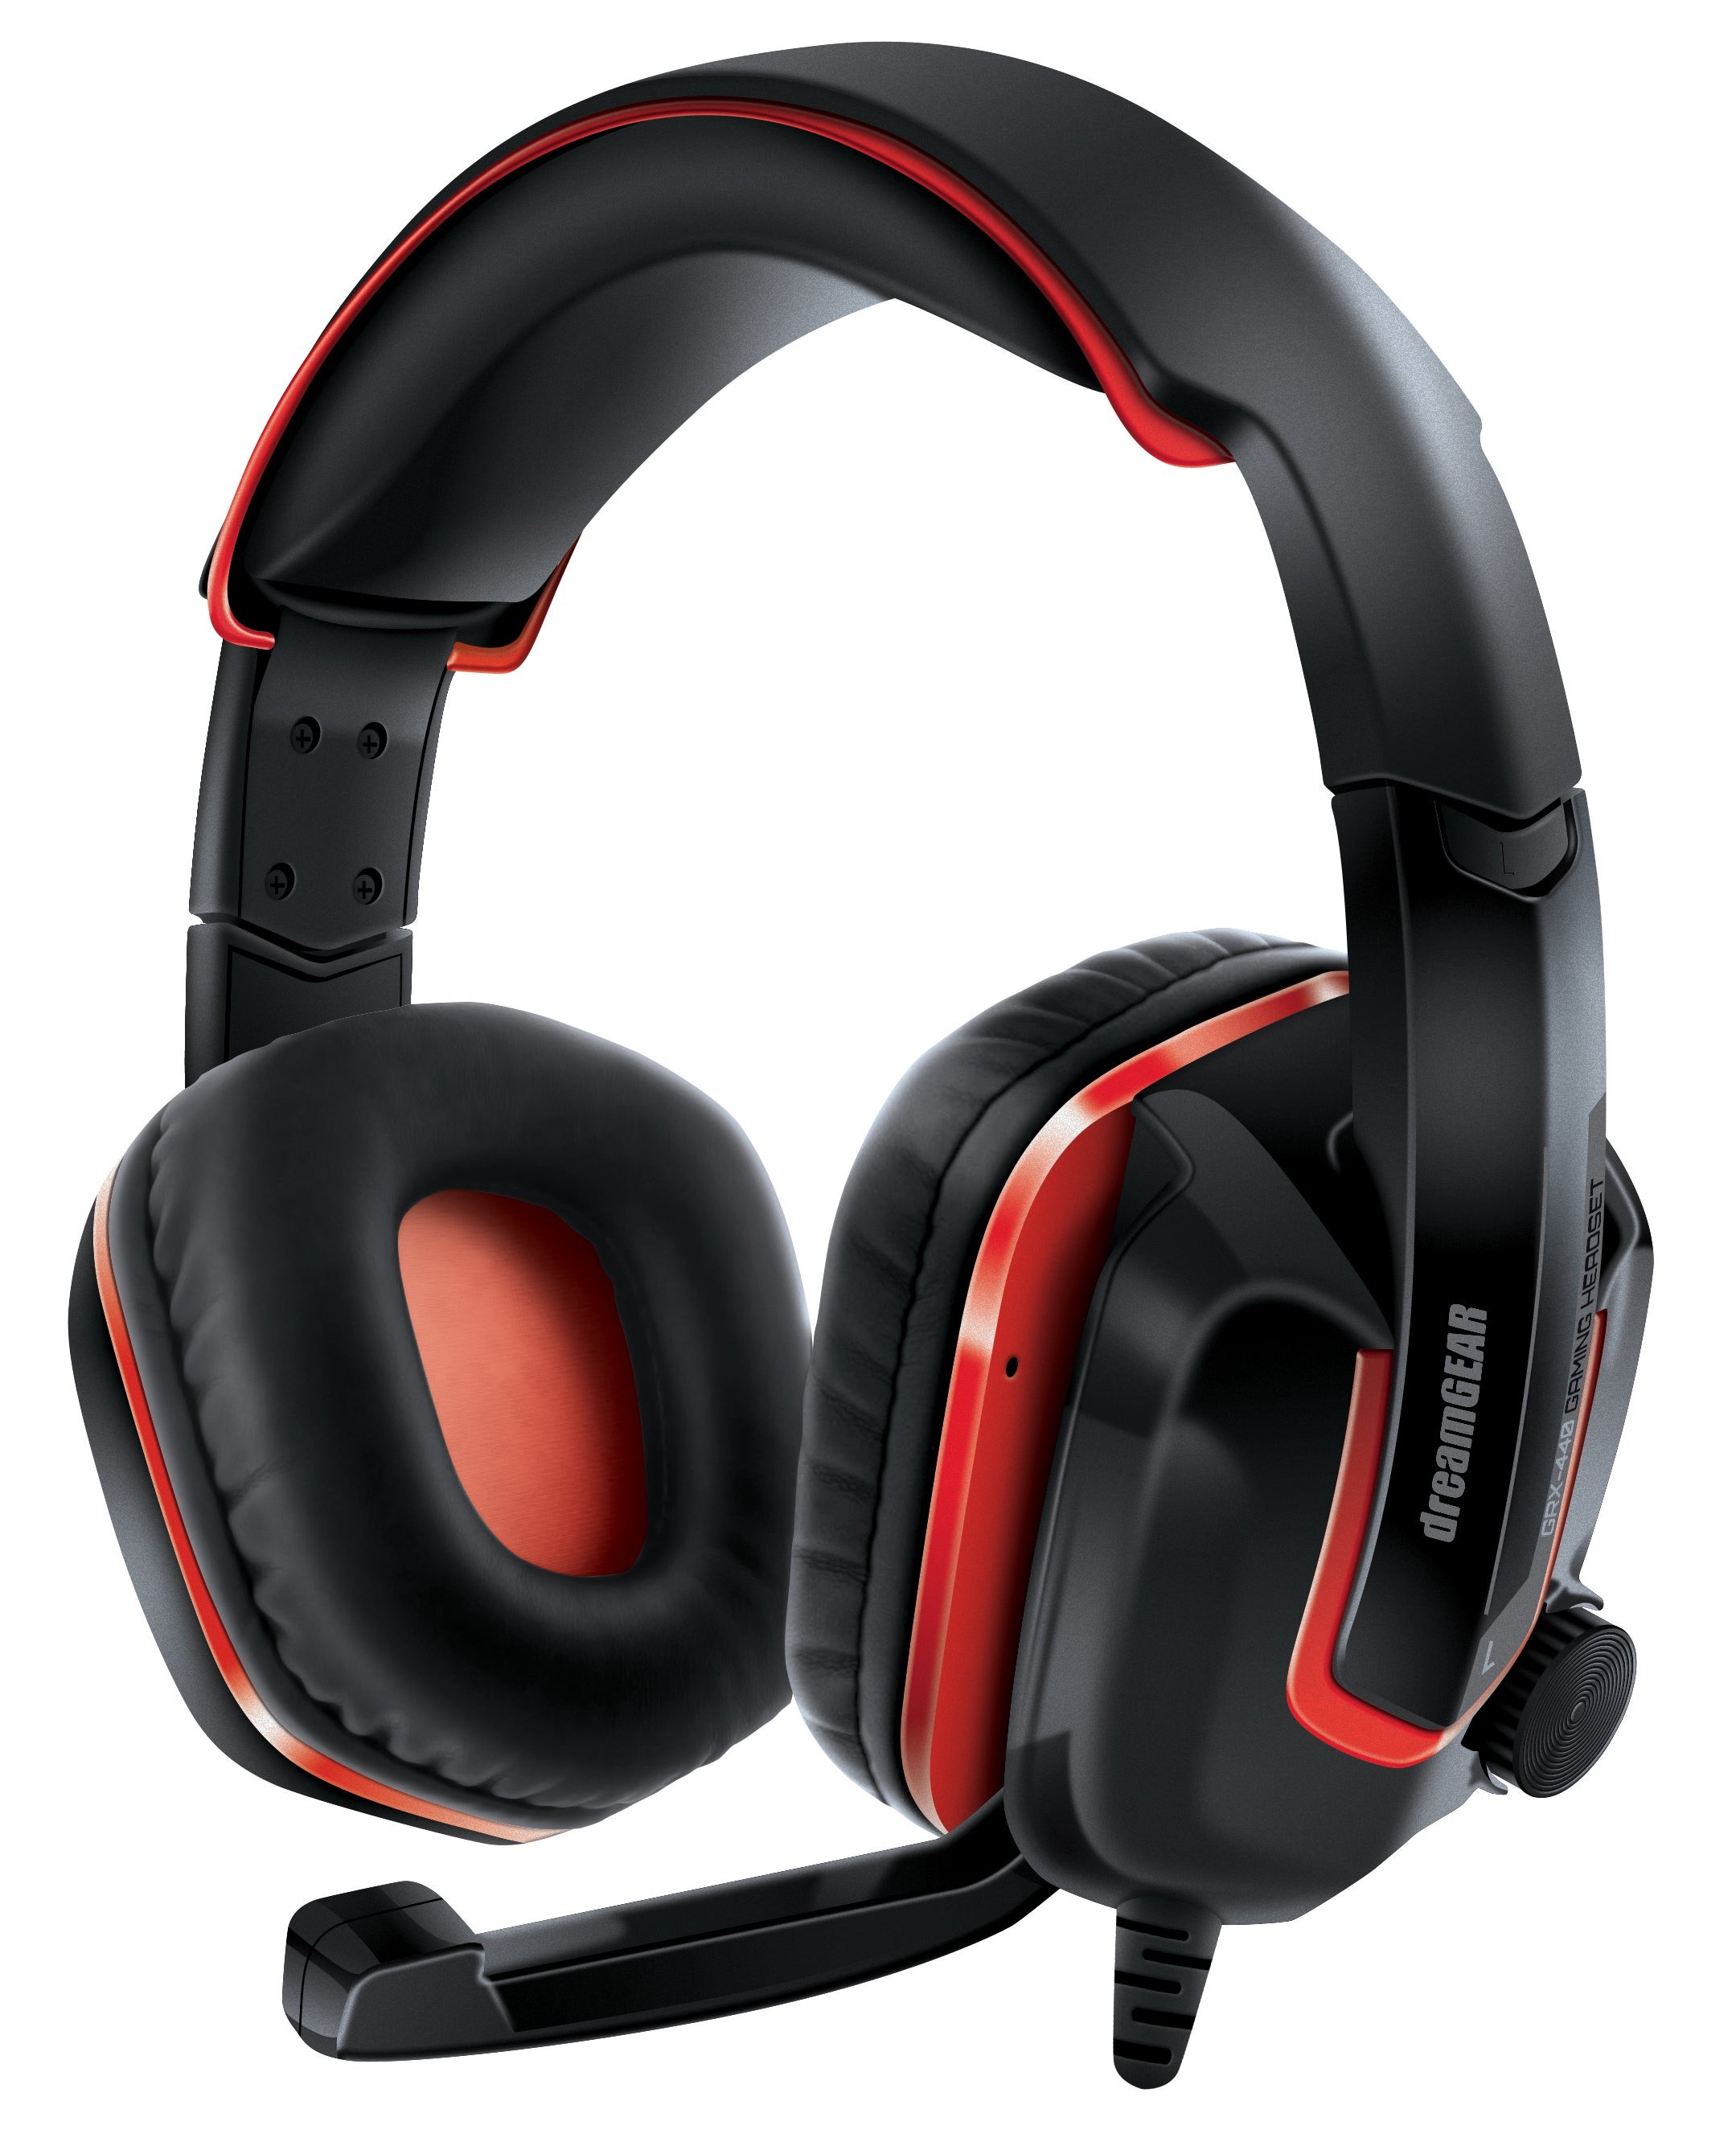 GRX-440 Advanced Gaming Headset for Nintendo Switch-OLED Black & Red